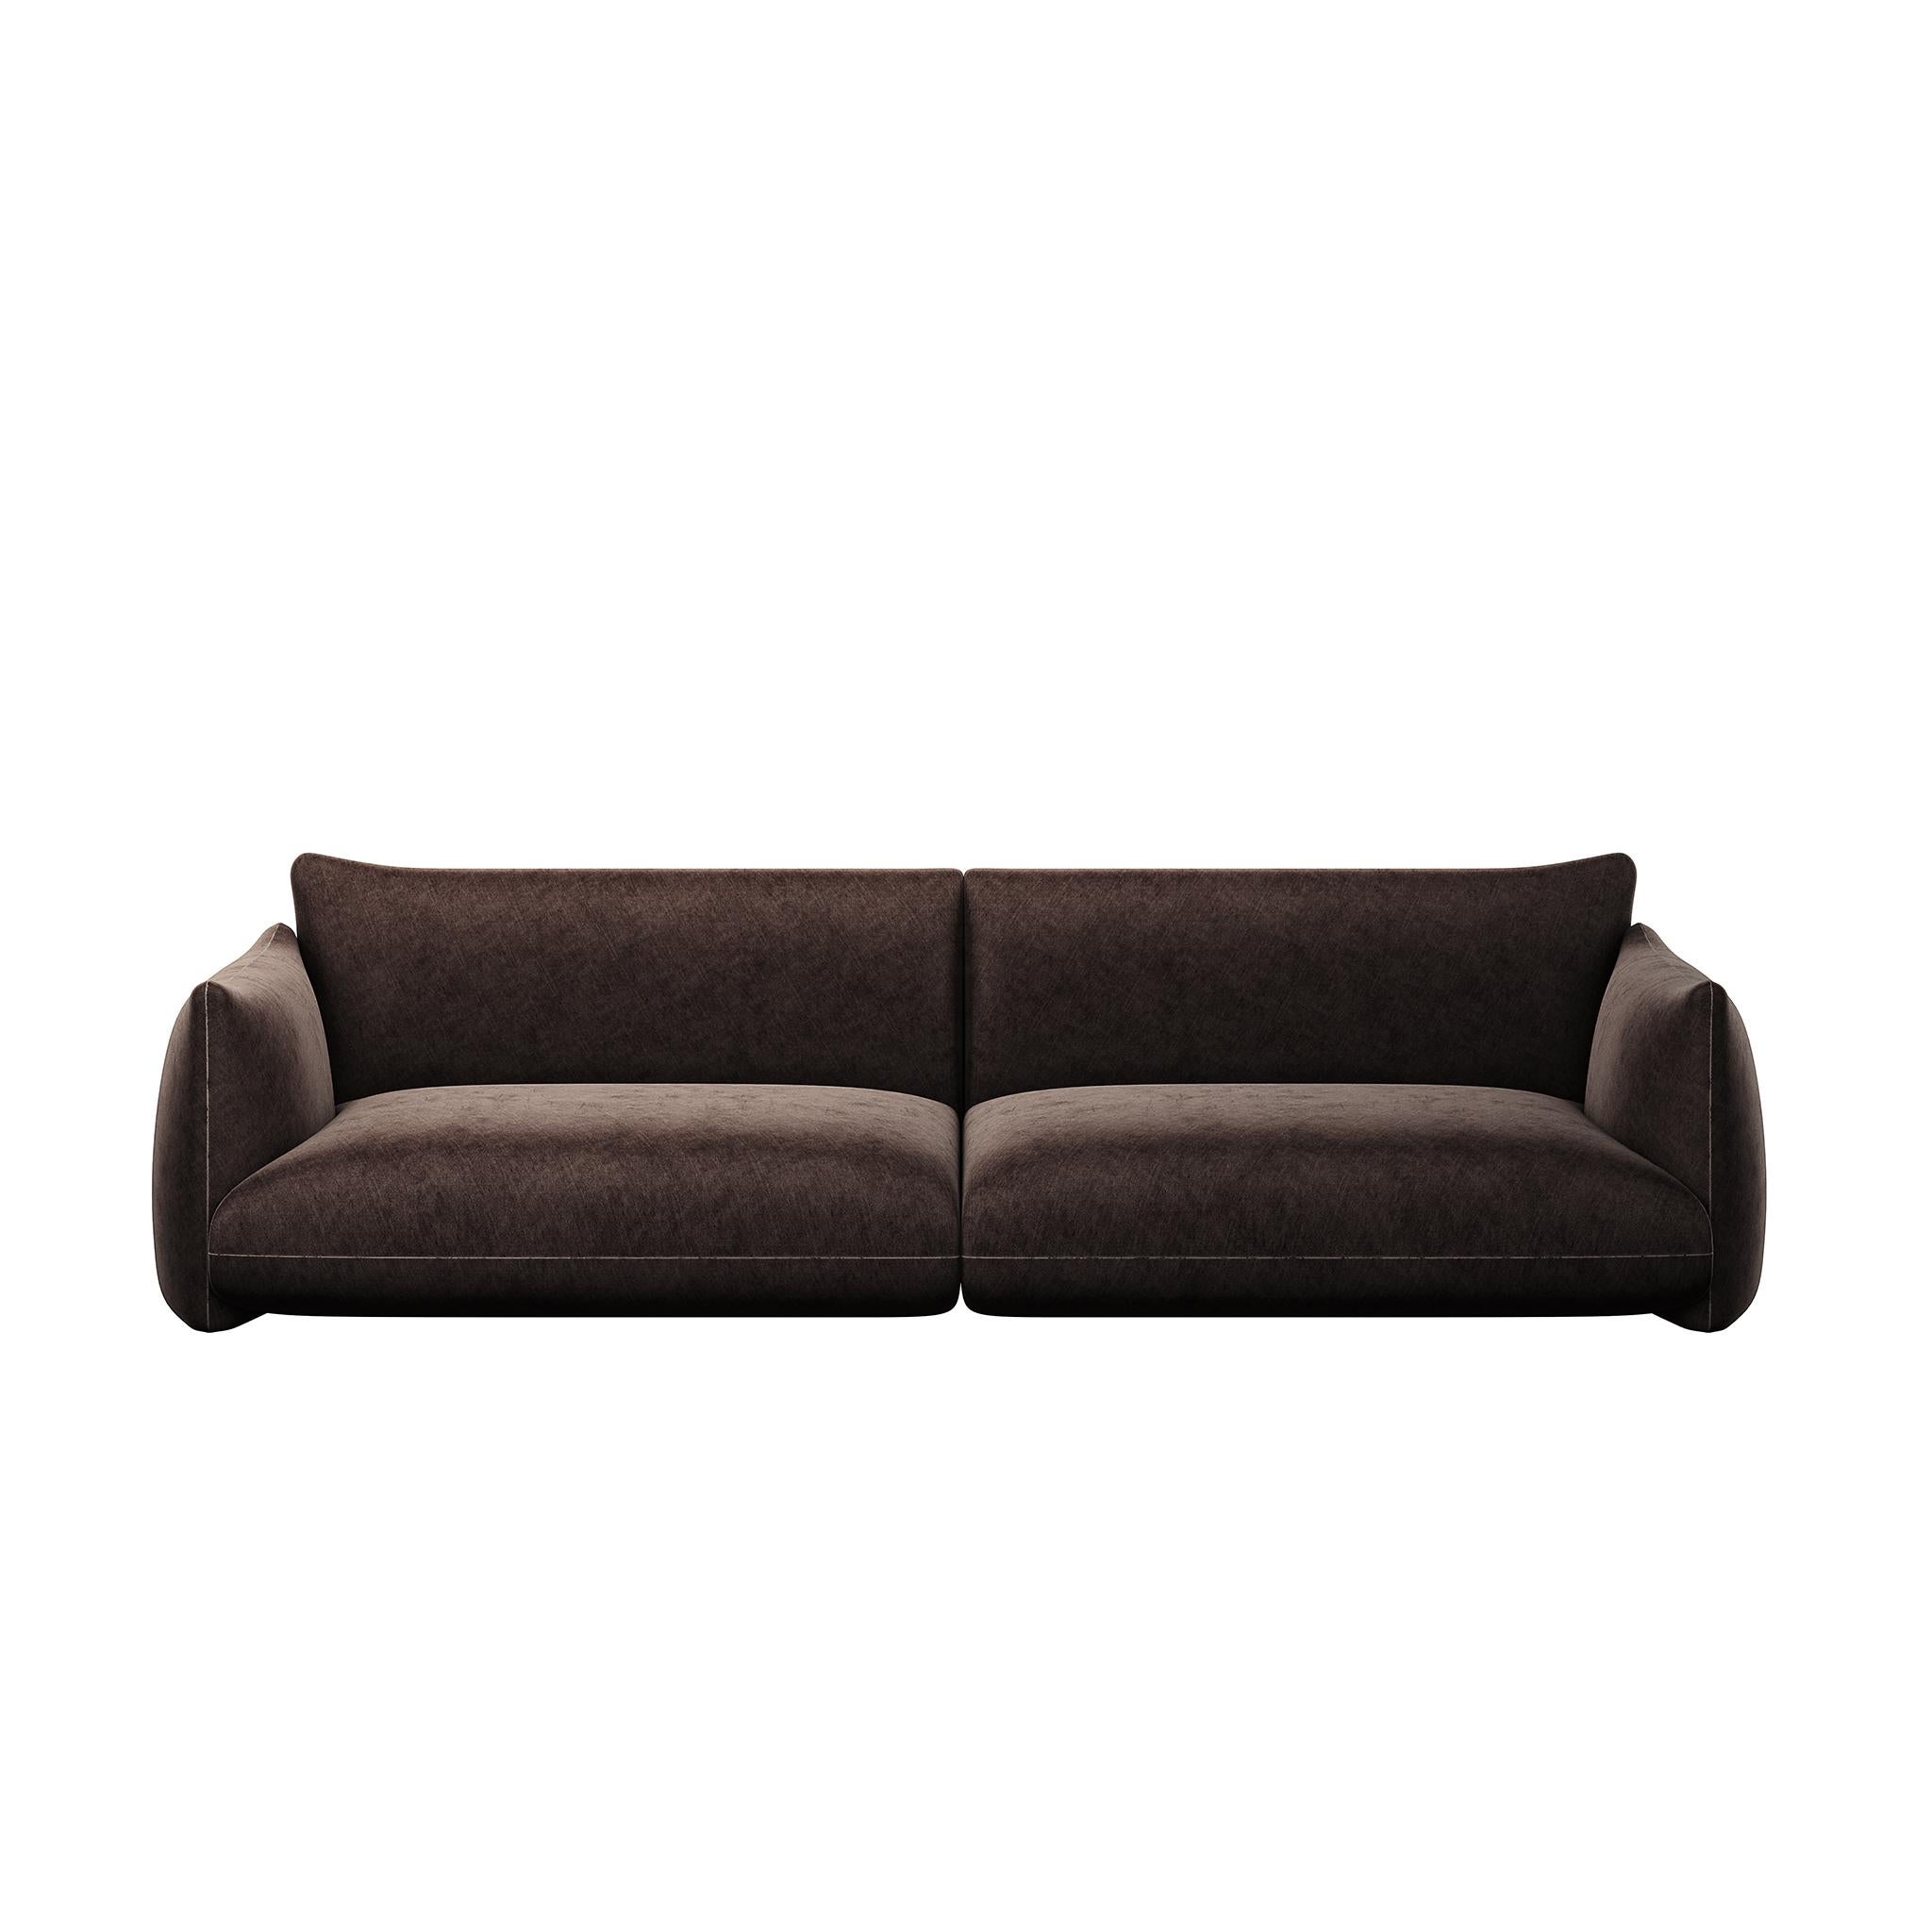 Unveil a new level of comfort and luxury with our Elastron Supersoft Chocolate Sofa.
The Elastron Supersoft Chocolate upholstery envelops you in sumptuous softness.
The rich chocolate hue not only adds warmth to your surroundings but also introduces